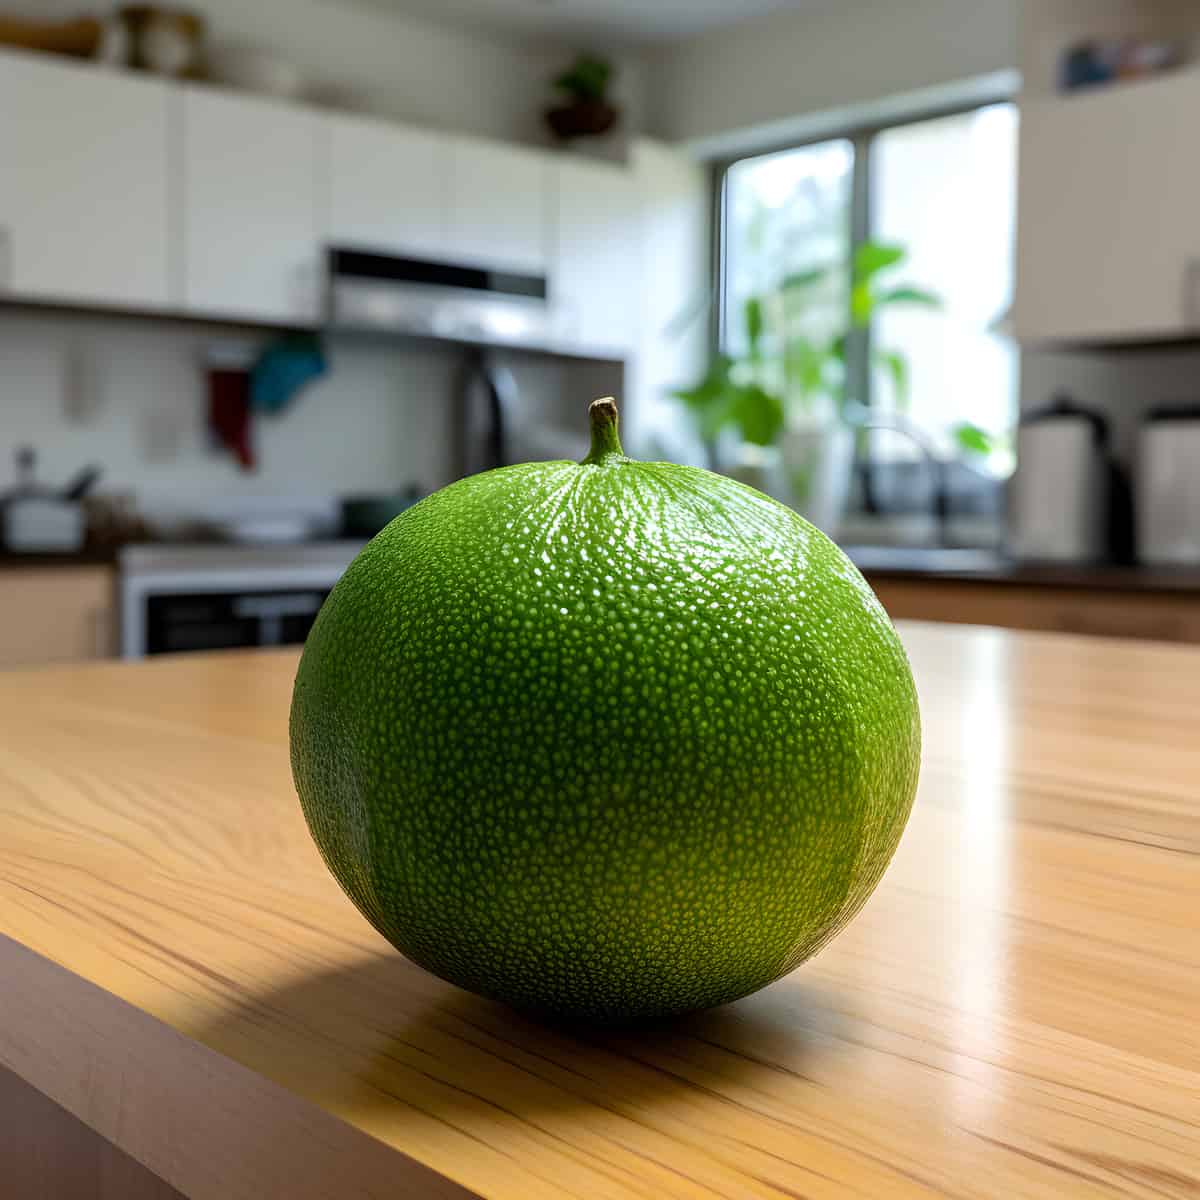 Sudachi Fruit on a kitchen counter